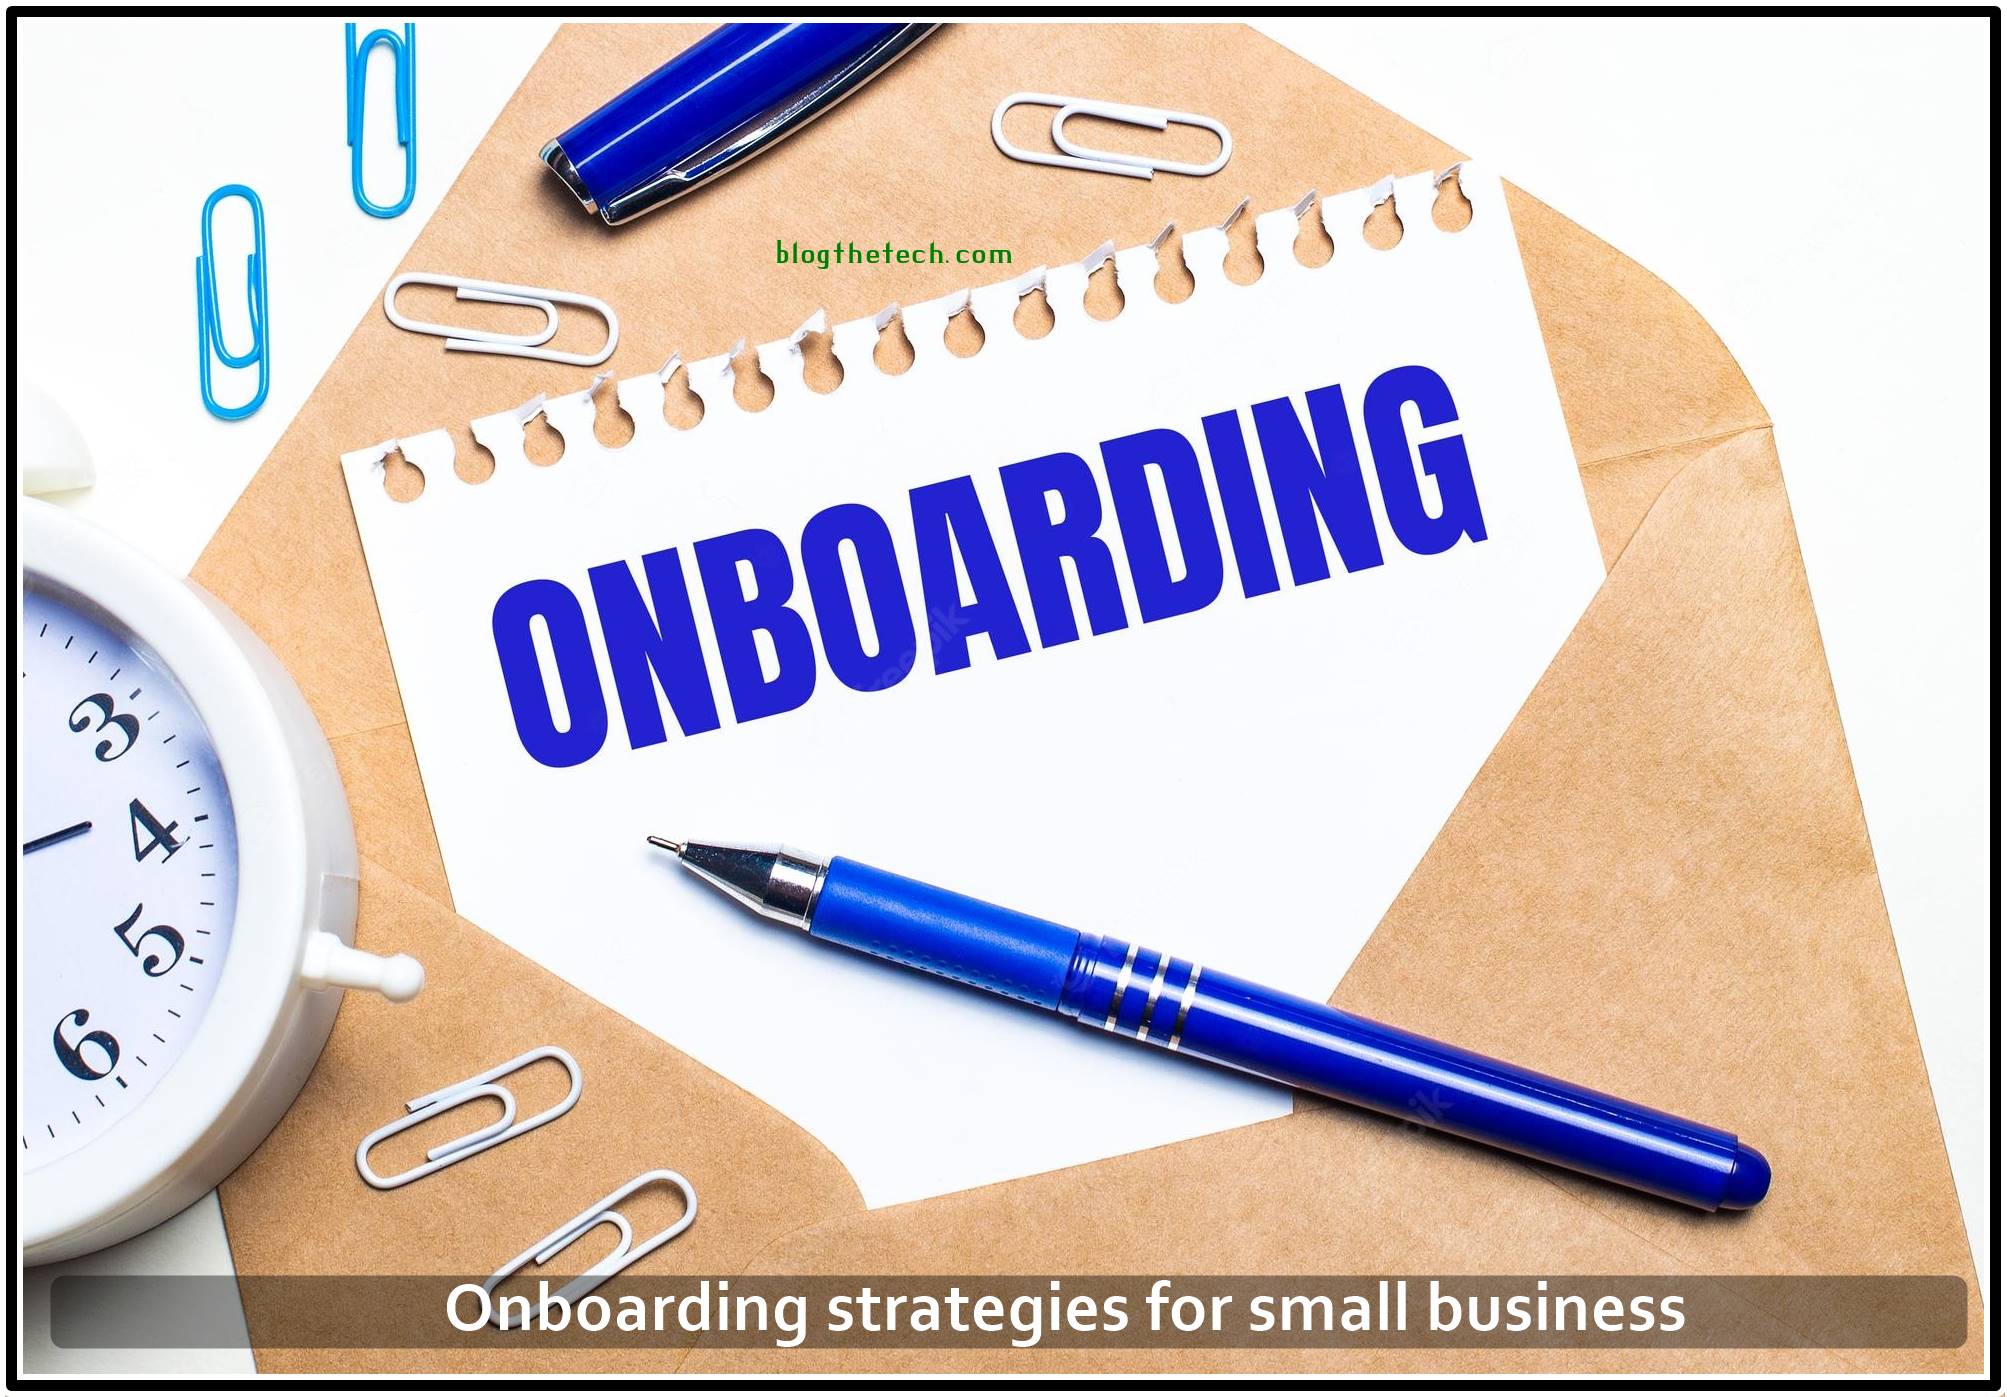 Onboarding strategies for small business